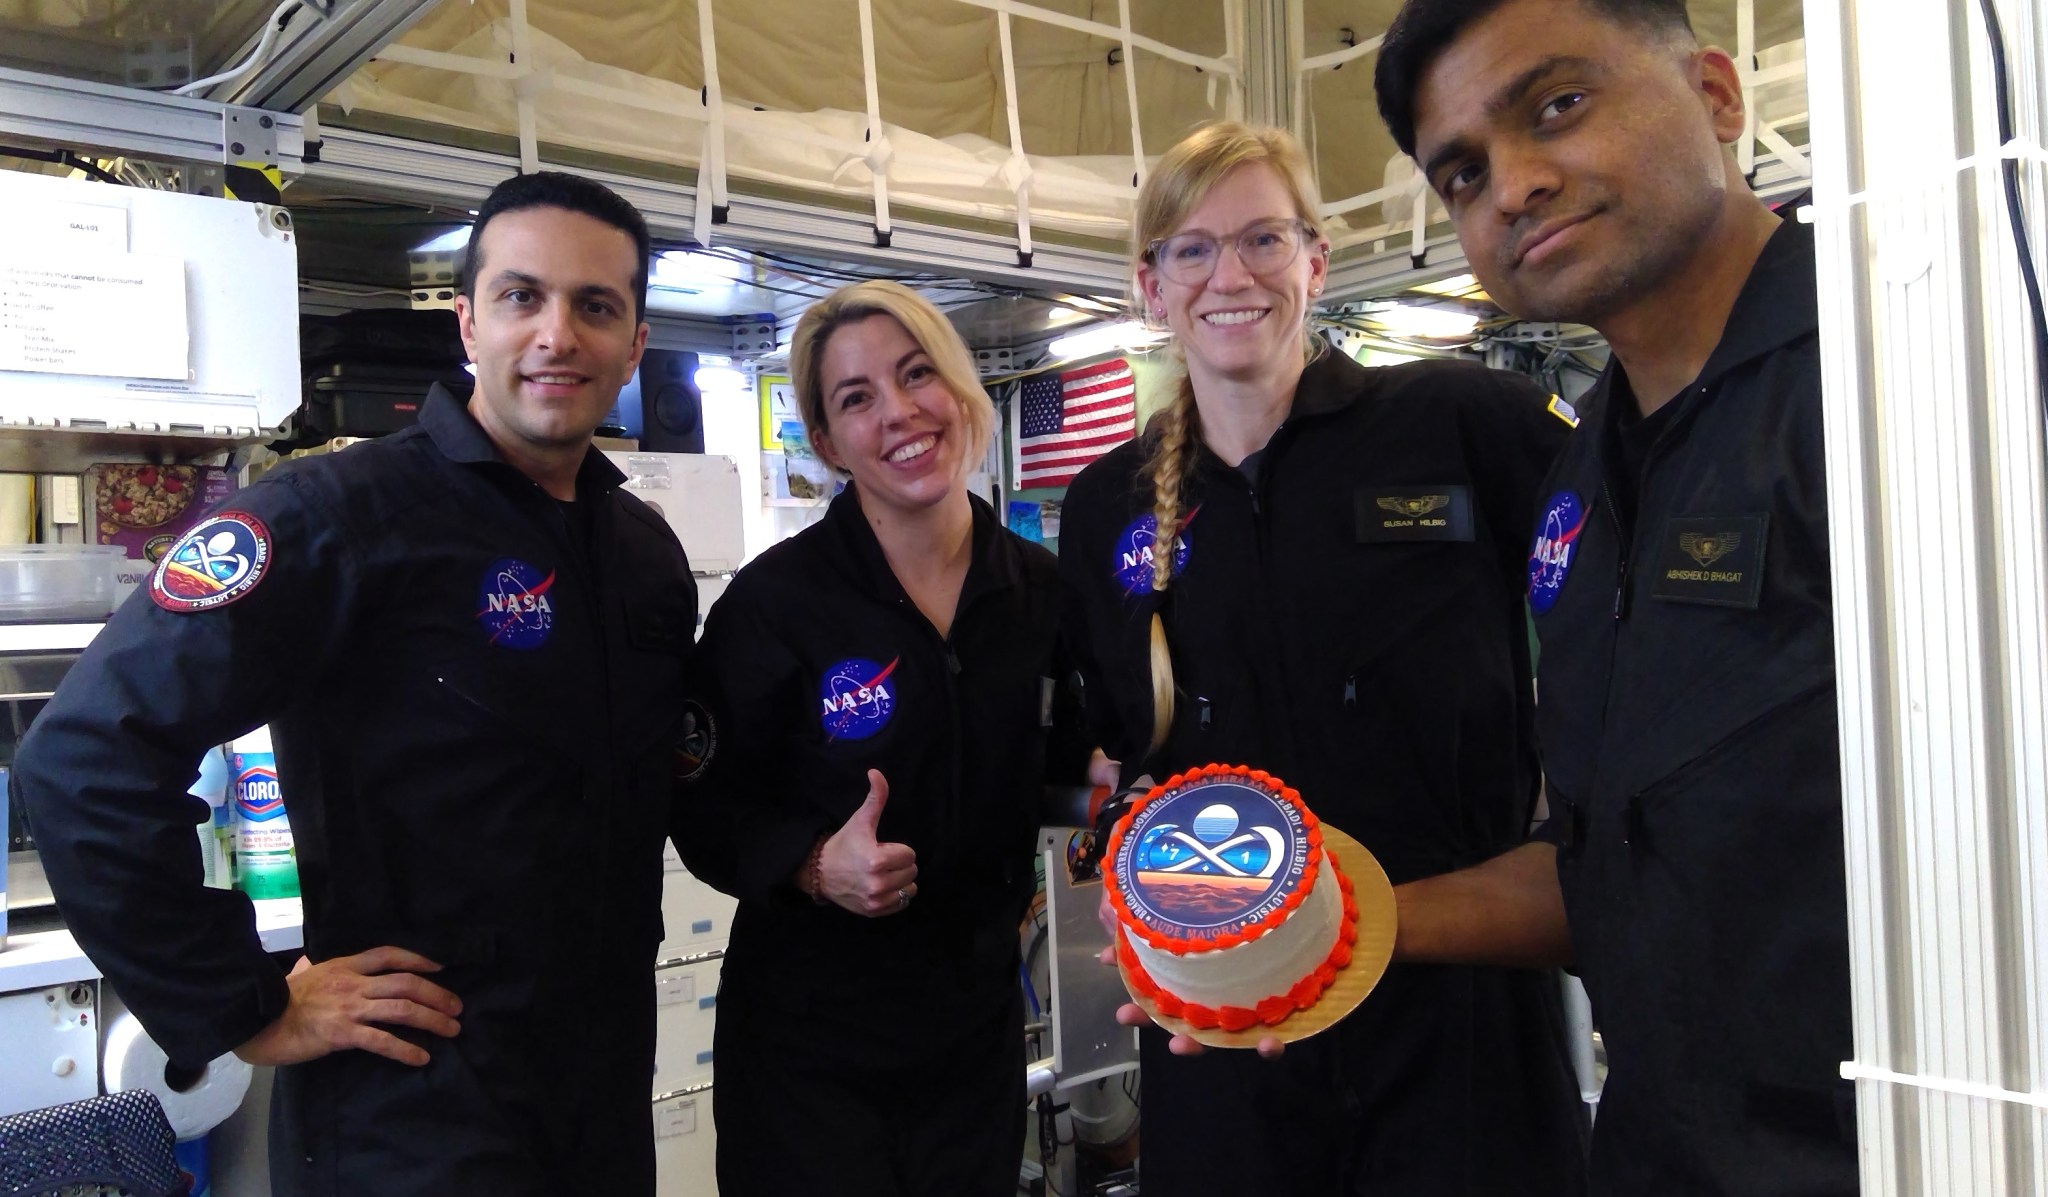 A group of four NASA astronauts in black uniforms are smiling and posing for a photo inside a space station module. One of the astronauts is holding a cake with a NASA logo on it. The background includes various equipment and a U.S. flag.